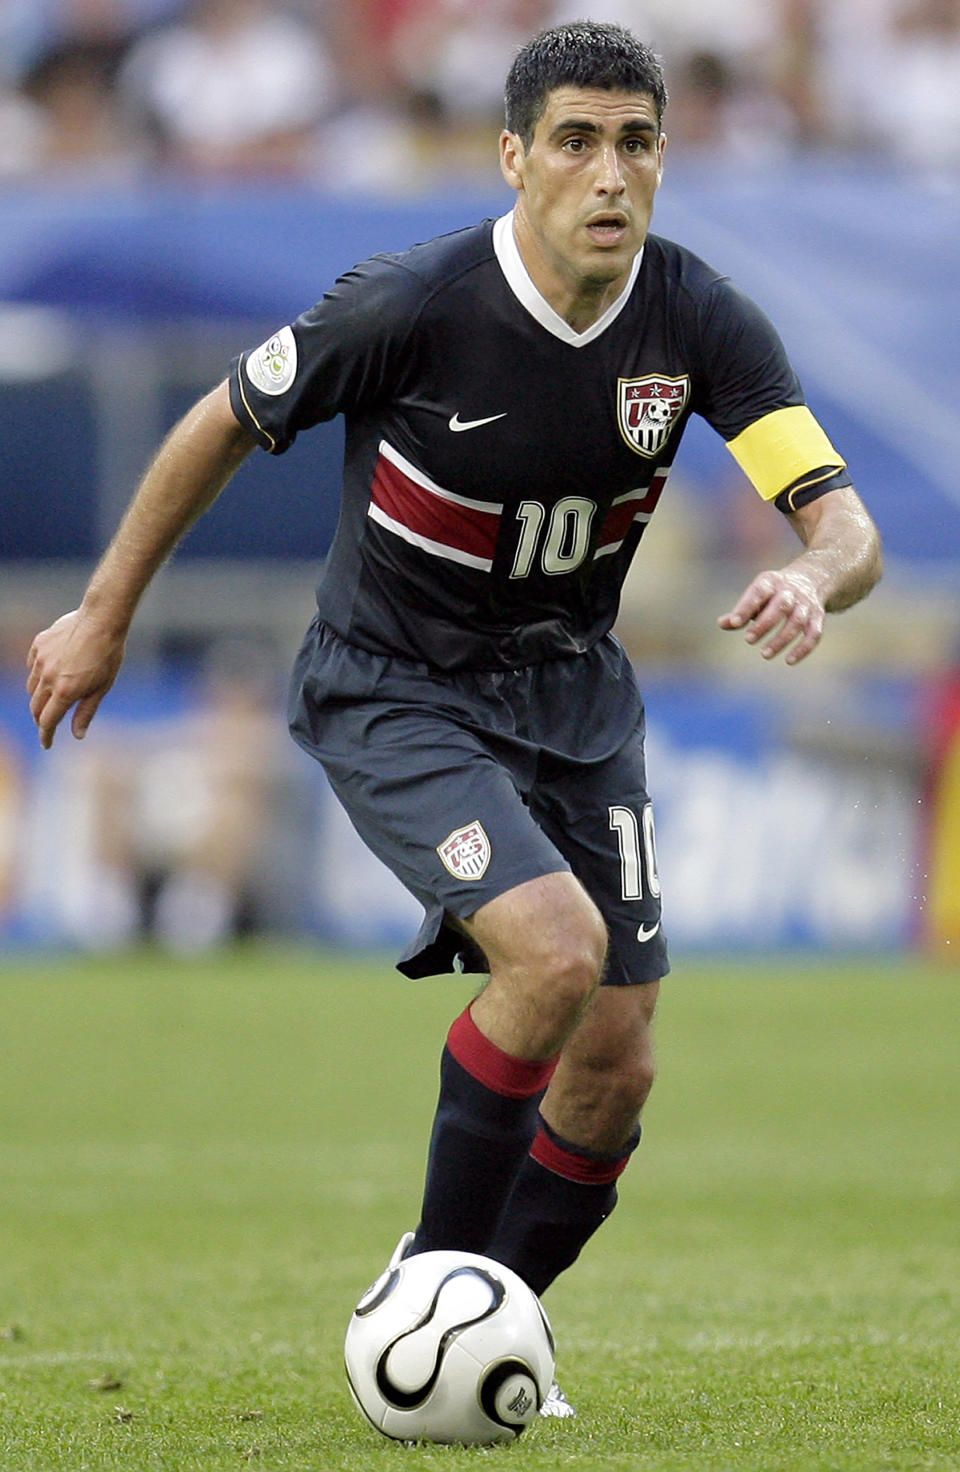 FILE - United States' Claudio Reyna plays the ball during the World Cup, Group E soccer match between the United States and the Czech Republic, at the Gelsenkirchen stadium, Germany, Monday, June 12, 2006. Gio Reyna, the son of former U.S. captain Claudio Reyna and women's national team midfielder Danielle Egan, was compared with Maradona in the '86 World Cup by U.S. coach Gregg Berhalter after a USA vs Mexico qualifying match in Mexico City on Thursday, March 24, 2022. (AP Photo/Michael Sohn, File)